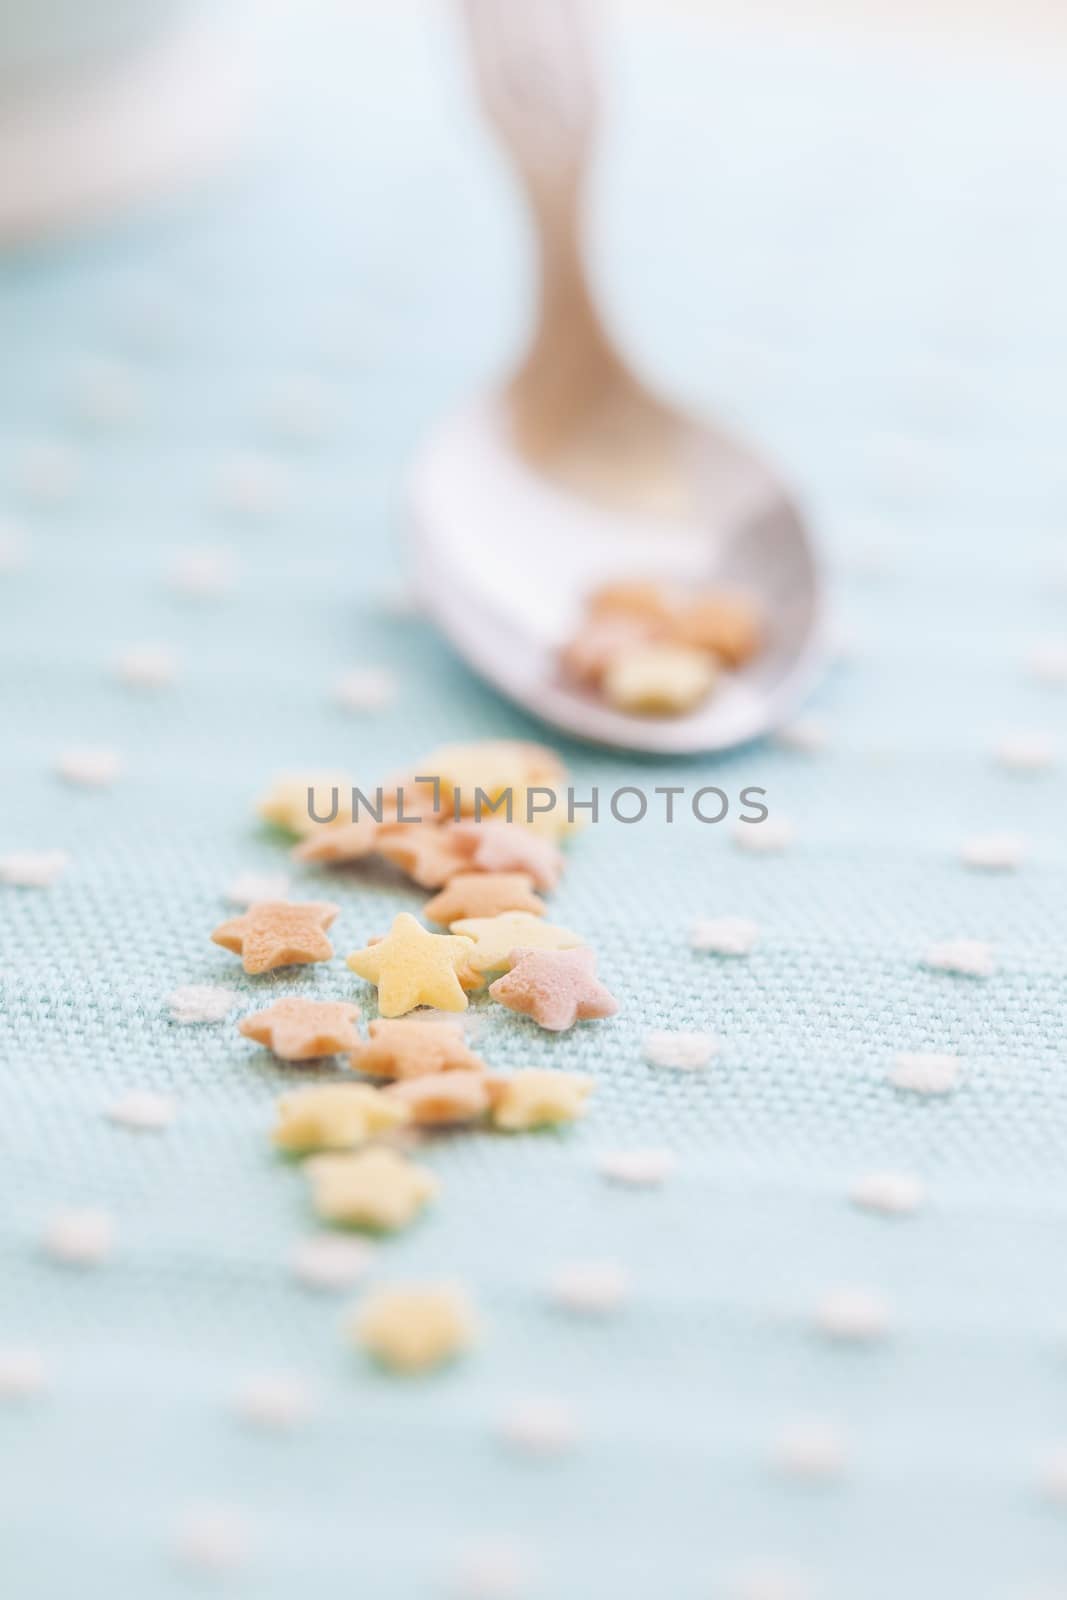 Cute picture of a spoon with star shaped candies